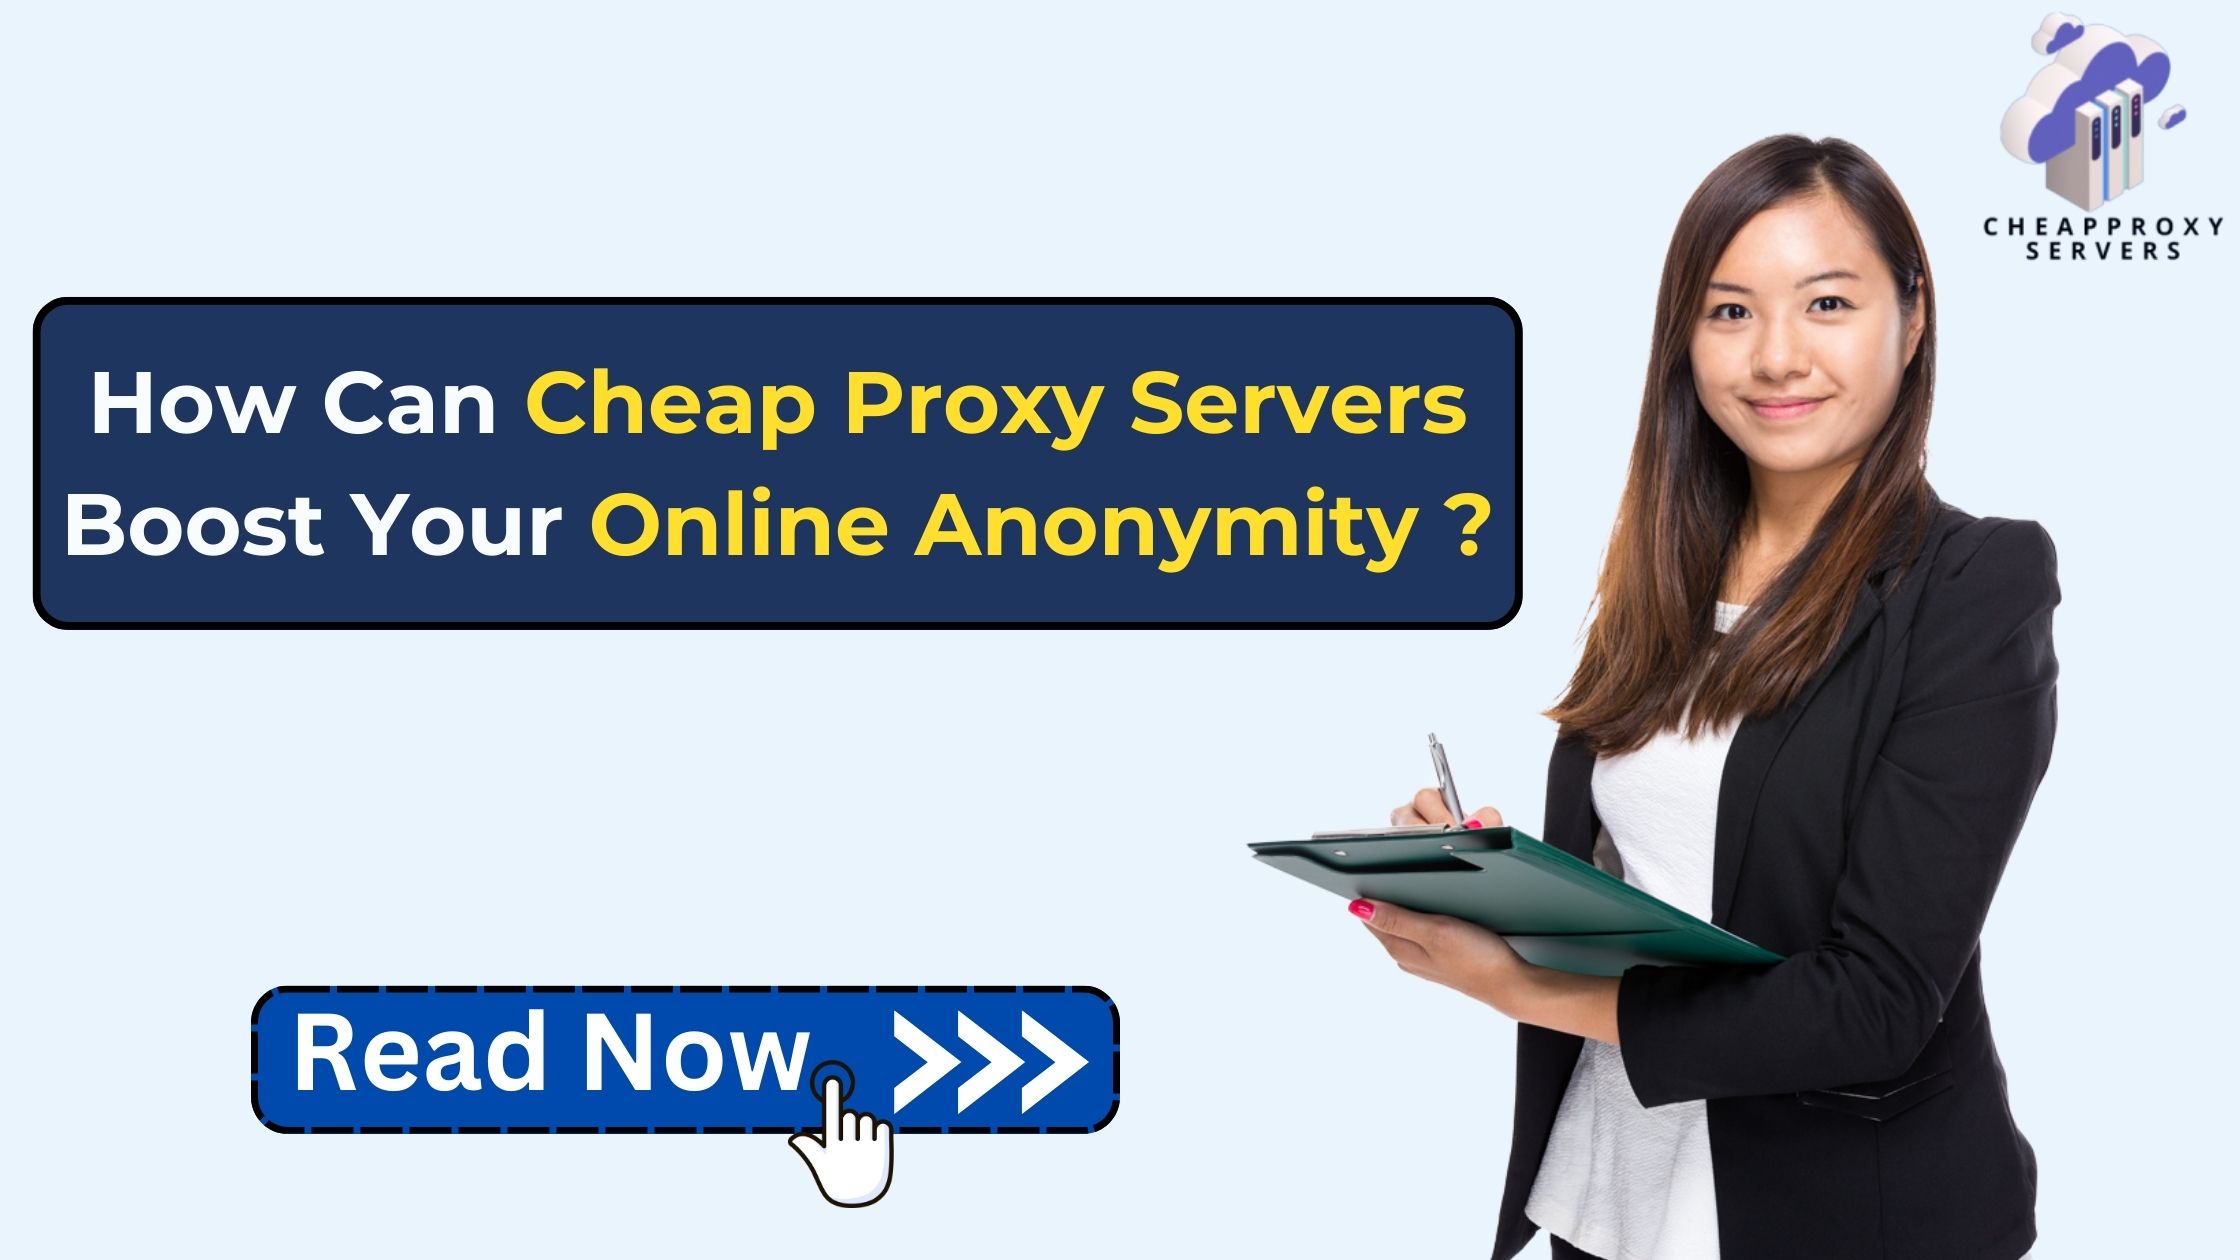 How Can Cheap Proxy Servers Boost Your Online Anonymity?